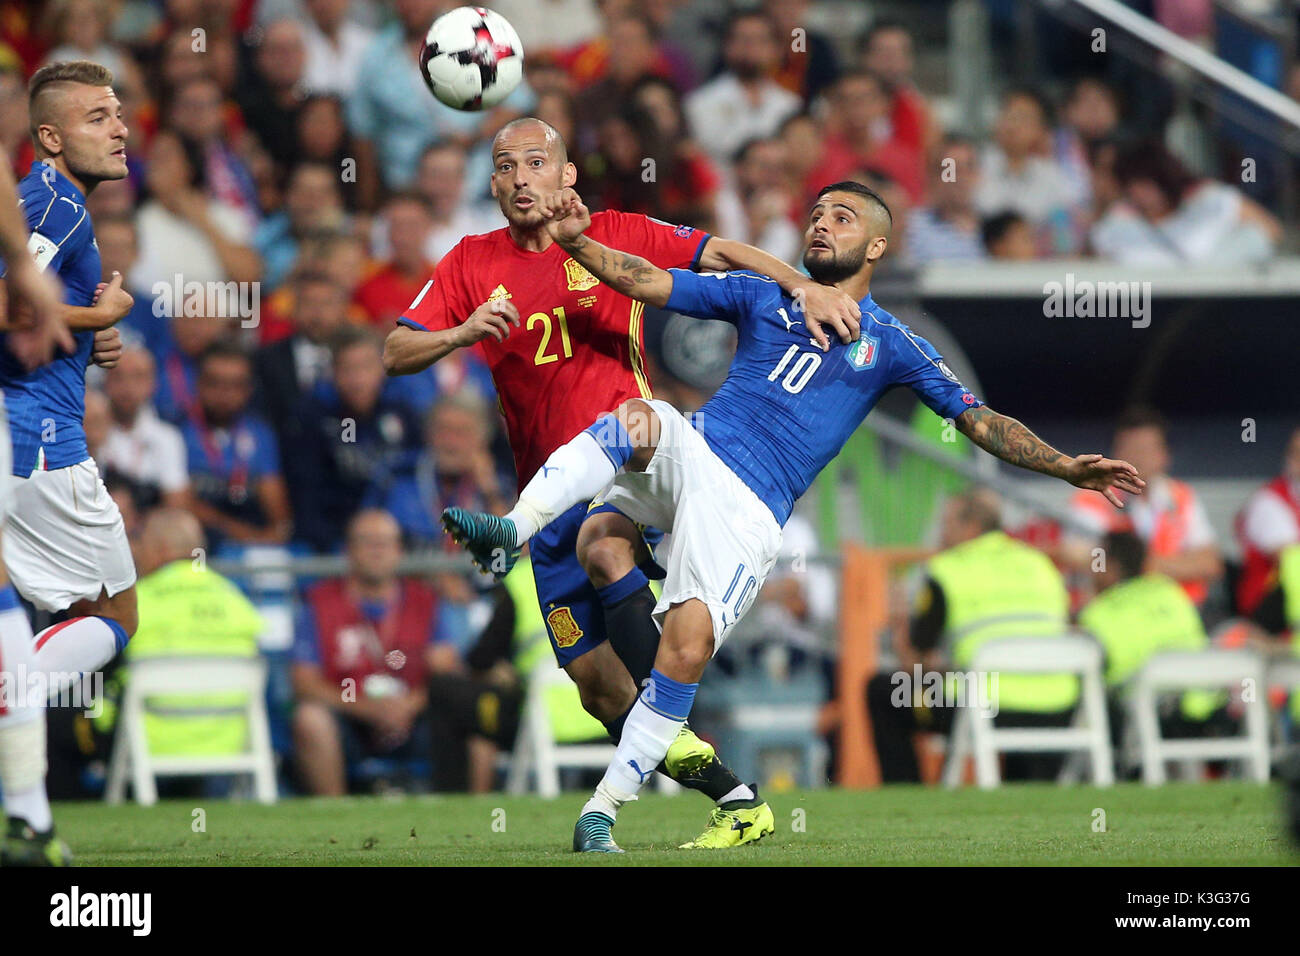 Santiago Bernabèu, Madrid, Spain. 2nd September, 2017. World Cup qualifiers Russia 2018. Group G. Match between Spain vs Italy. David Silva and Insigne in action during the match. Credit: marco iacobucci/Alamy Live News Stock Photo